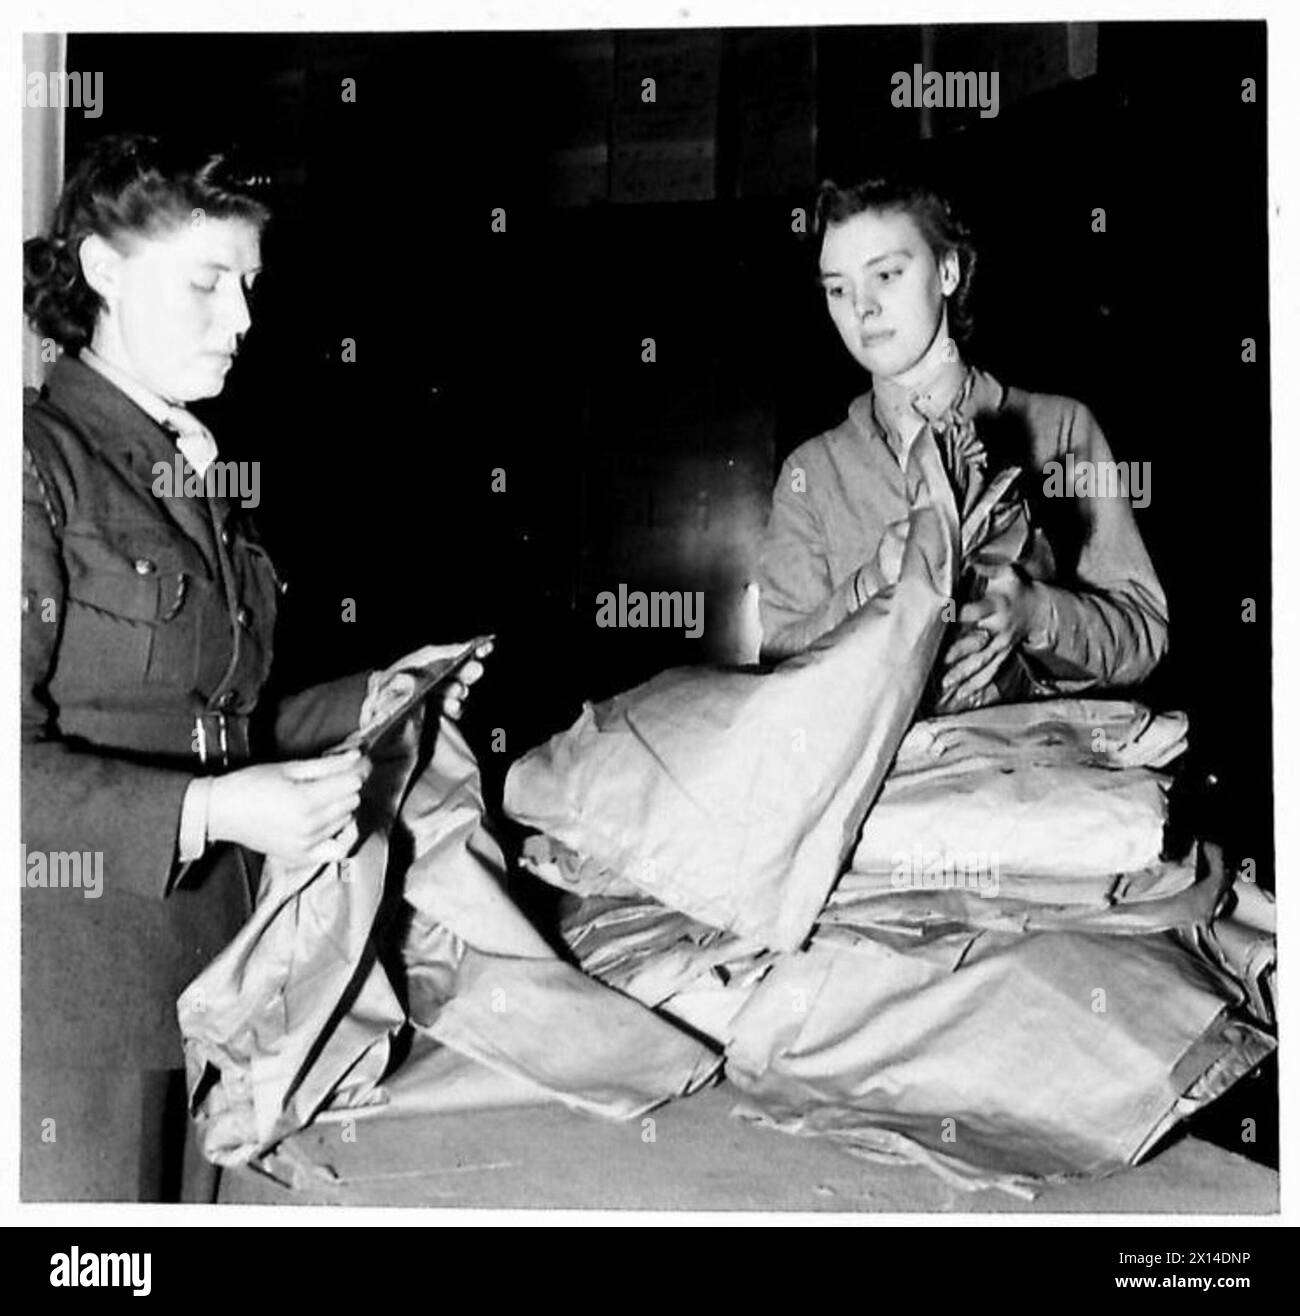 ATS AT WORK IN ORDNANCE DEPOT - L/Cpl Gladys Gardner and her sister Pte. Margaret Gardner of Stoke,on Trent are serving together at an Ordnance Depot in the Midlands. Gladys, who is 23 worked in a tile factory before the War. She was one of the first volunteers for the Service in 1938 and was called up two days after War broke out. Margaret 20, who formerly worked with her sister and later went into munitions, joined up as year ago. Now they are both working as storewomen, handling vast stocks of ATS uniforms. They have two brothers in the Royal Artillery, one in the RAF and another in the ATC Stock Photo